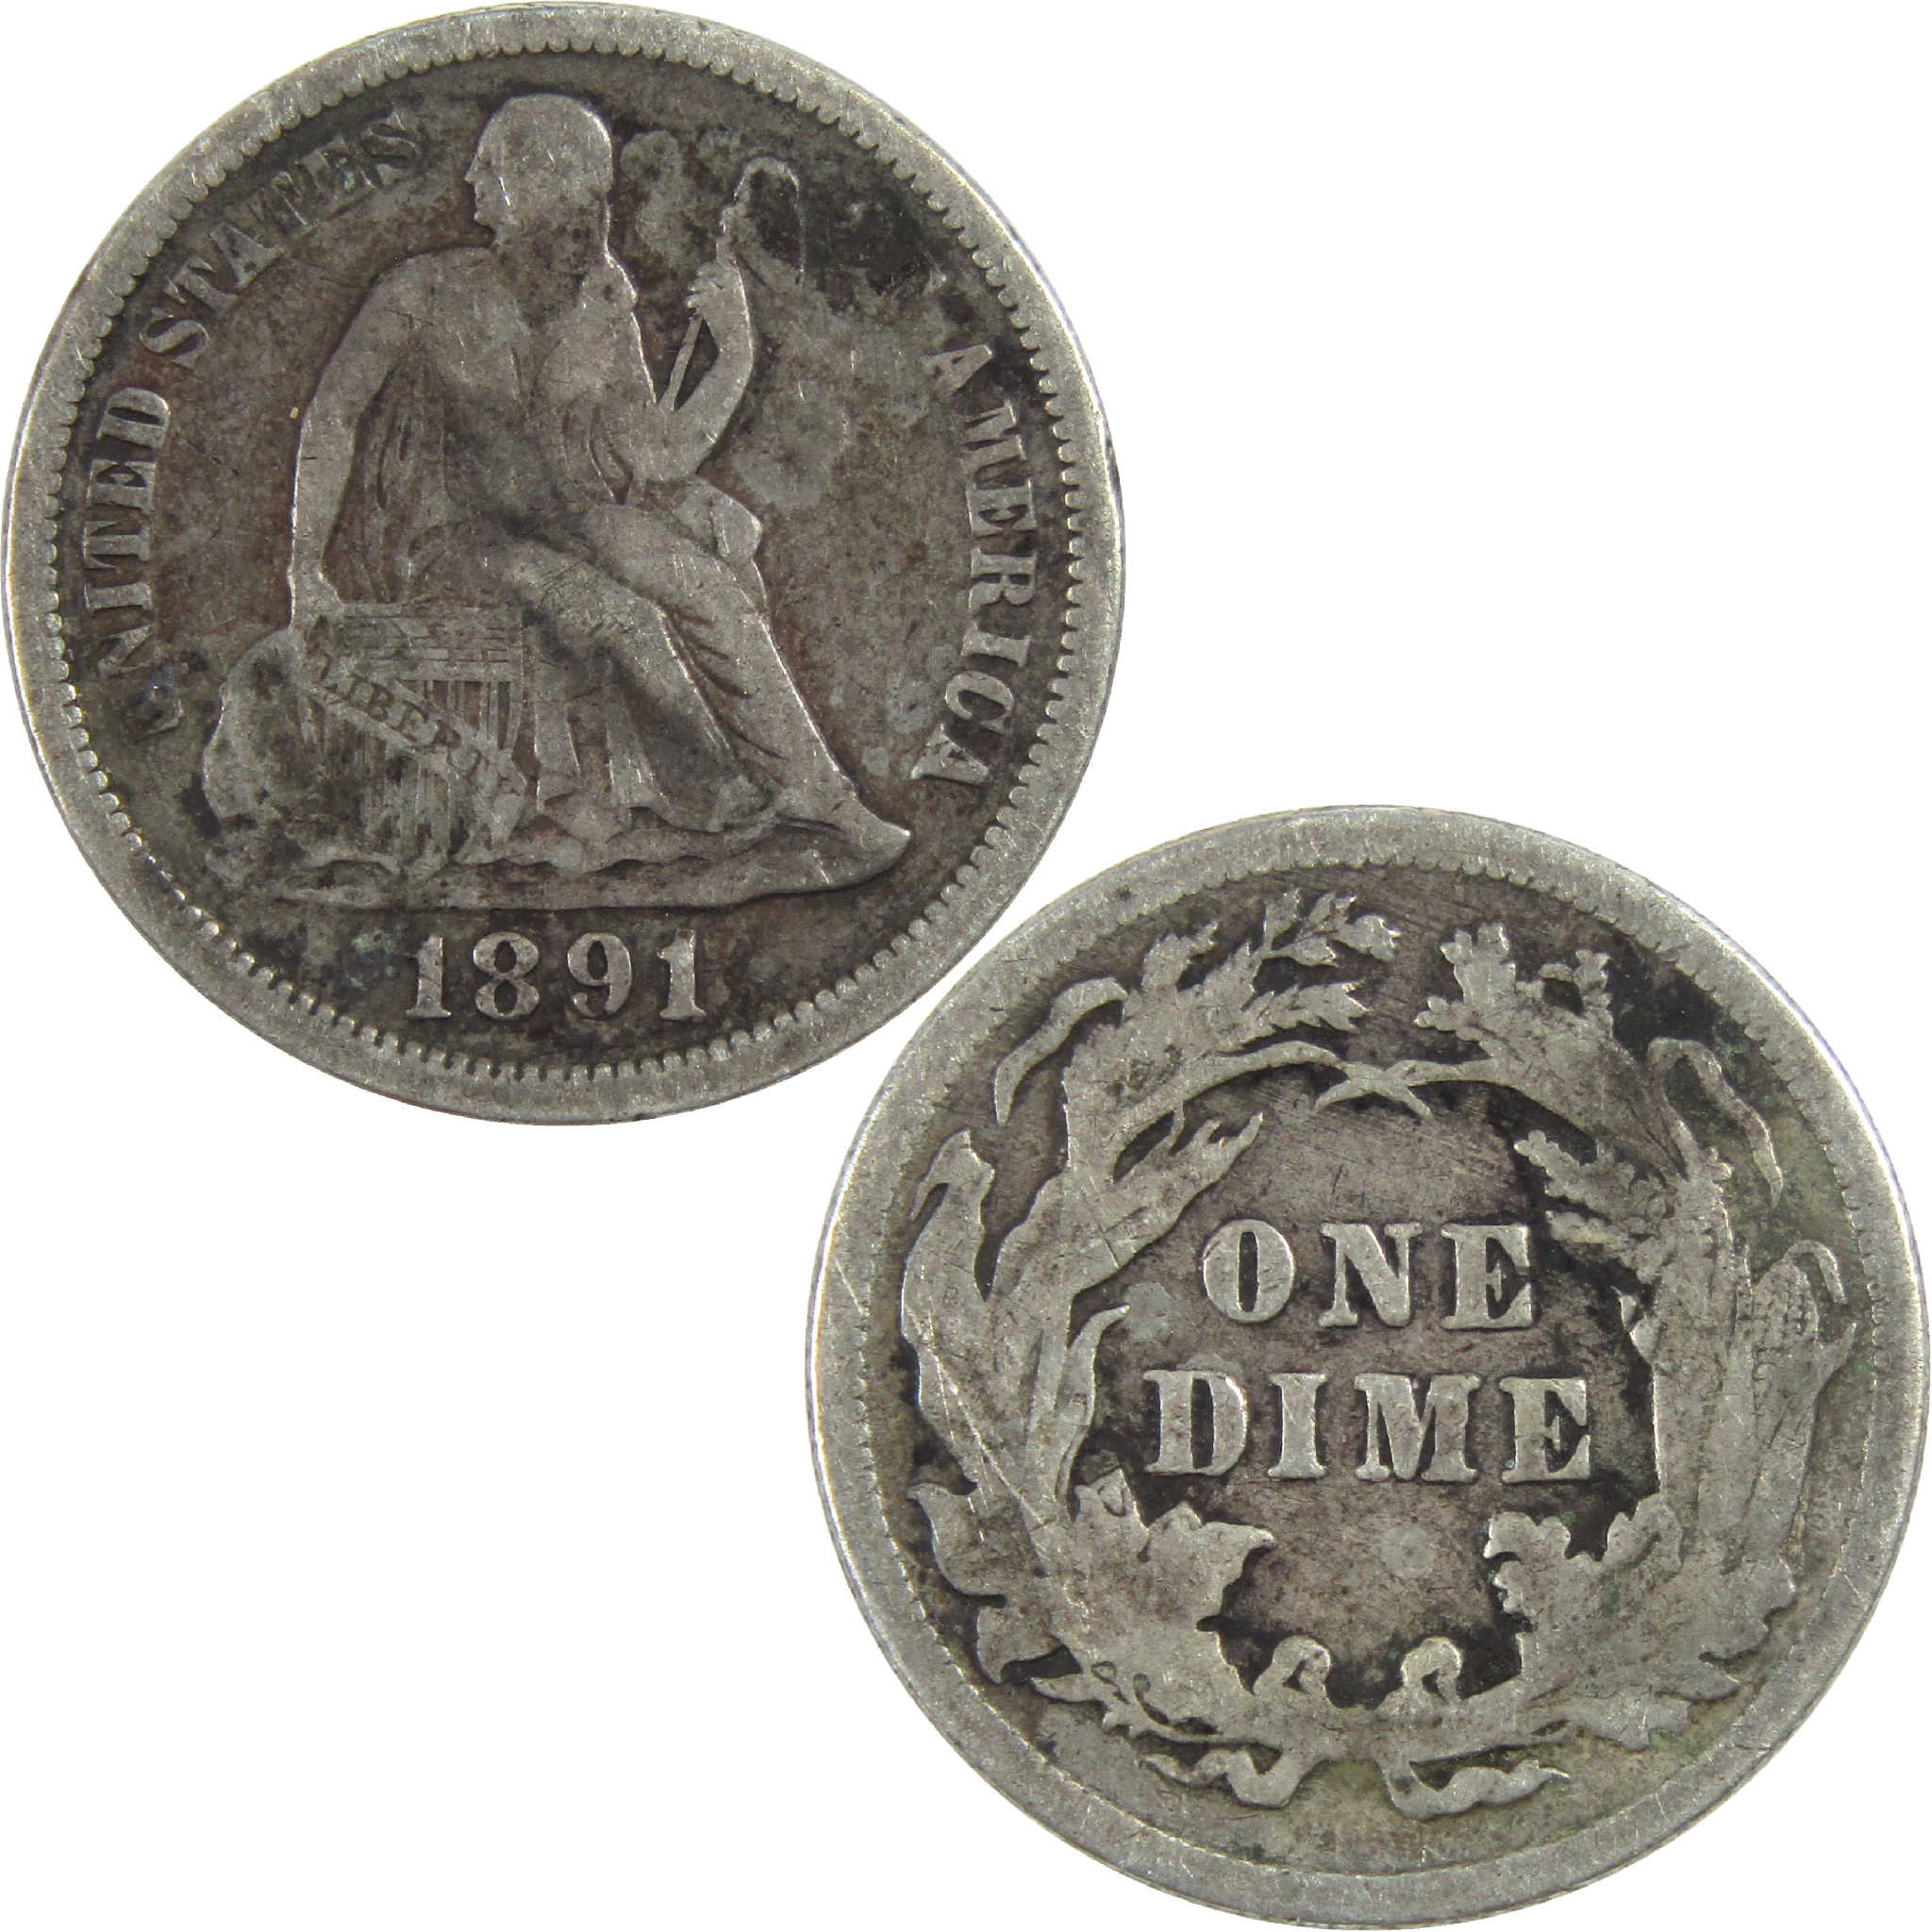 1891 Seated Liberty Dime VF Very Fine Silver 10c Coin SKU:I12268